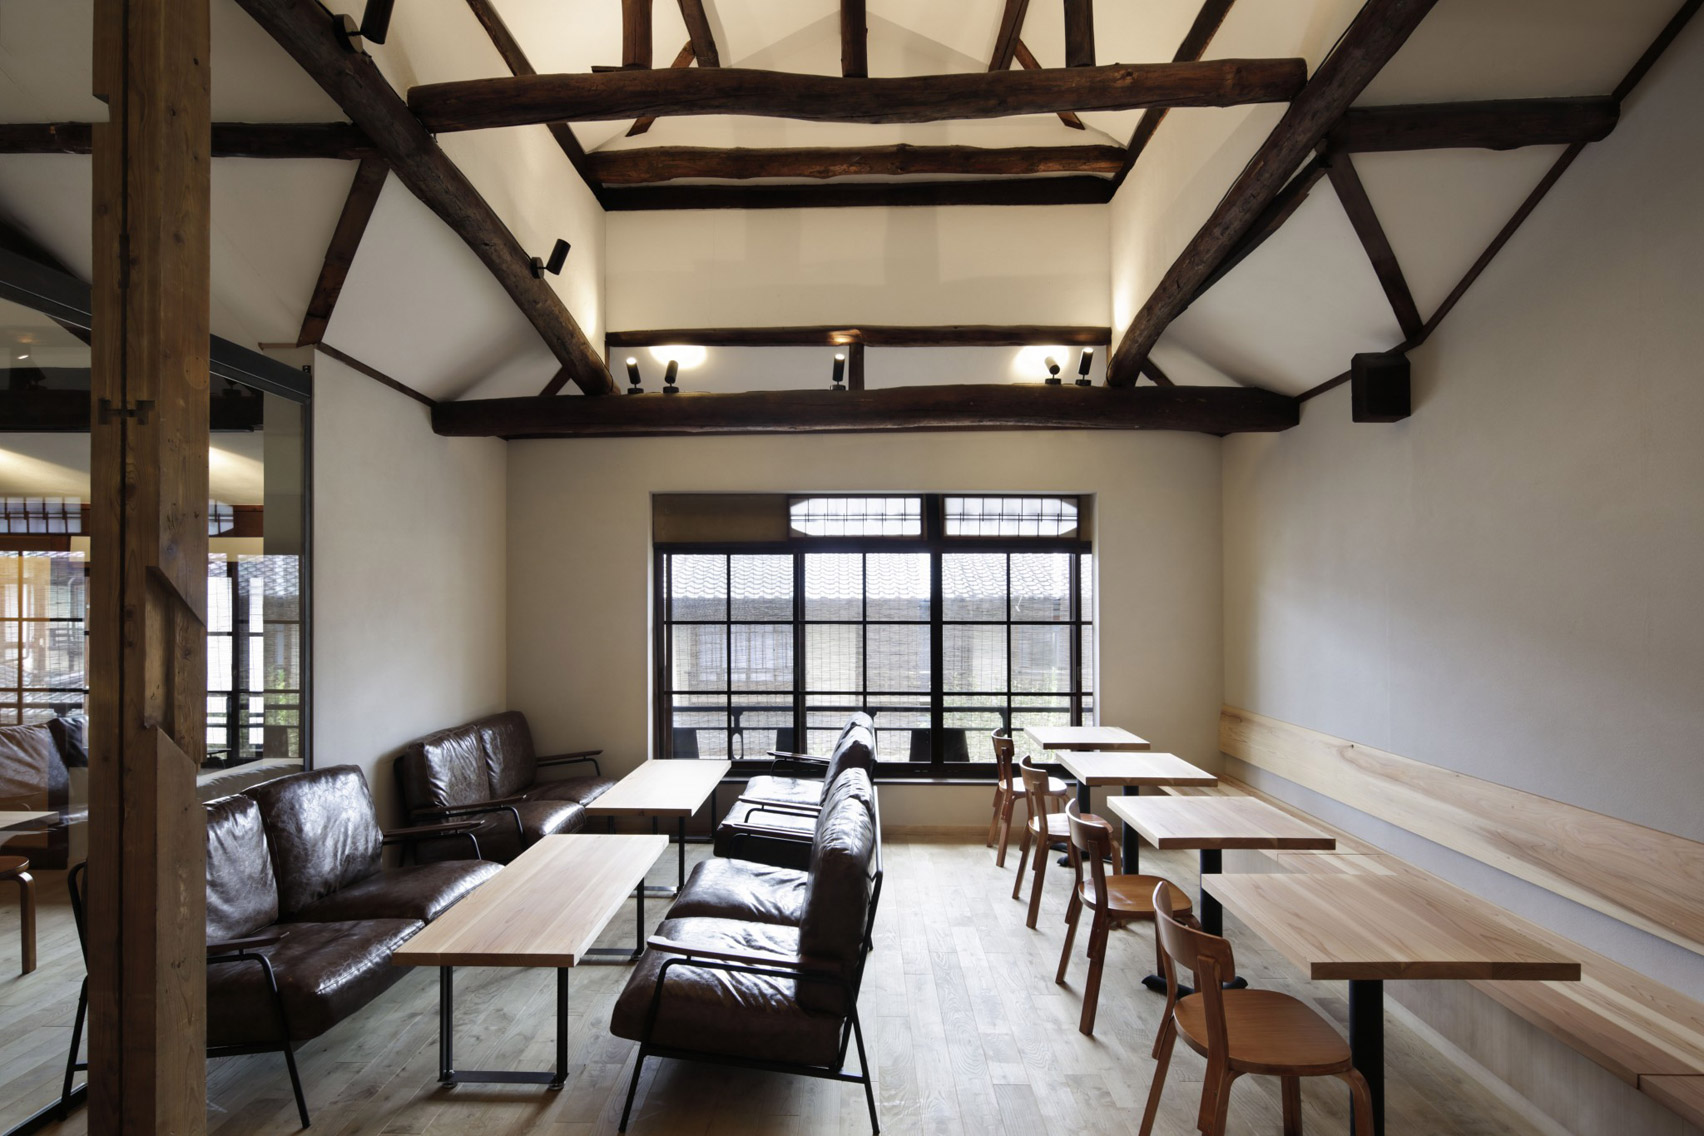 Cedar and cacao infuse the interiors of Kyoto’s Dandelion Chocolate cafe